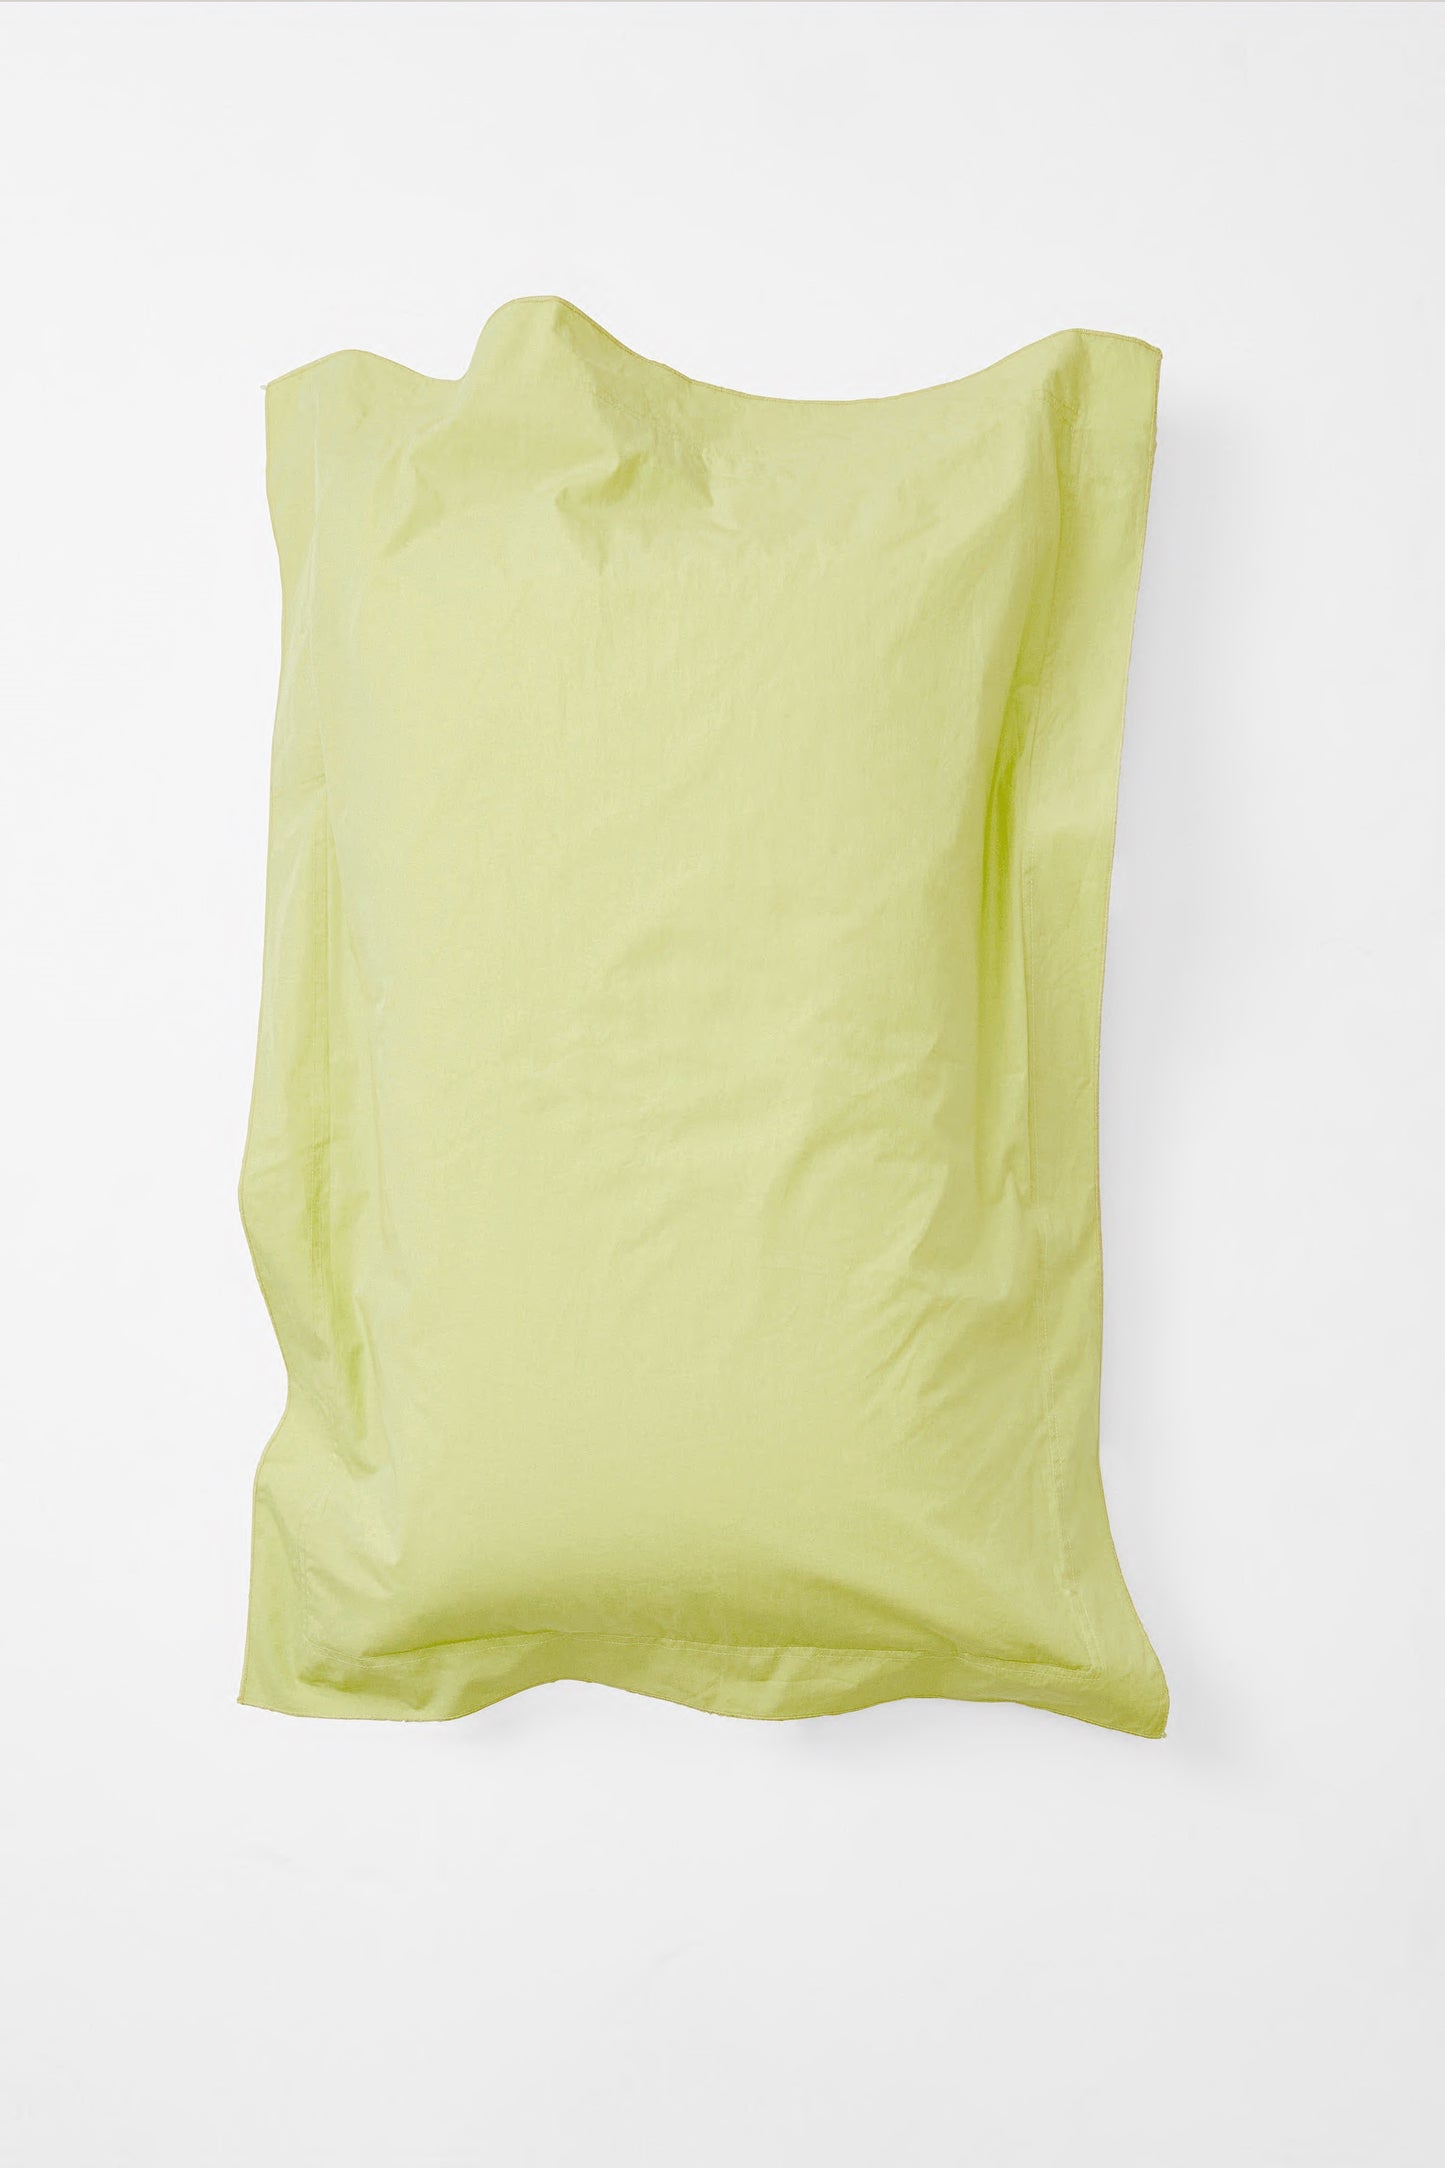 Aerial view of single 'sulphur' coloured pillow with lightly ruffled edges.